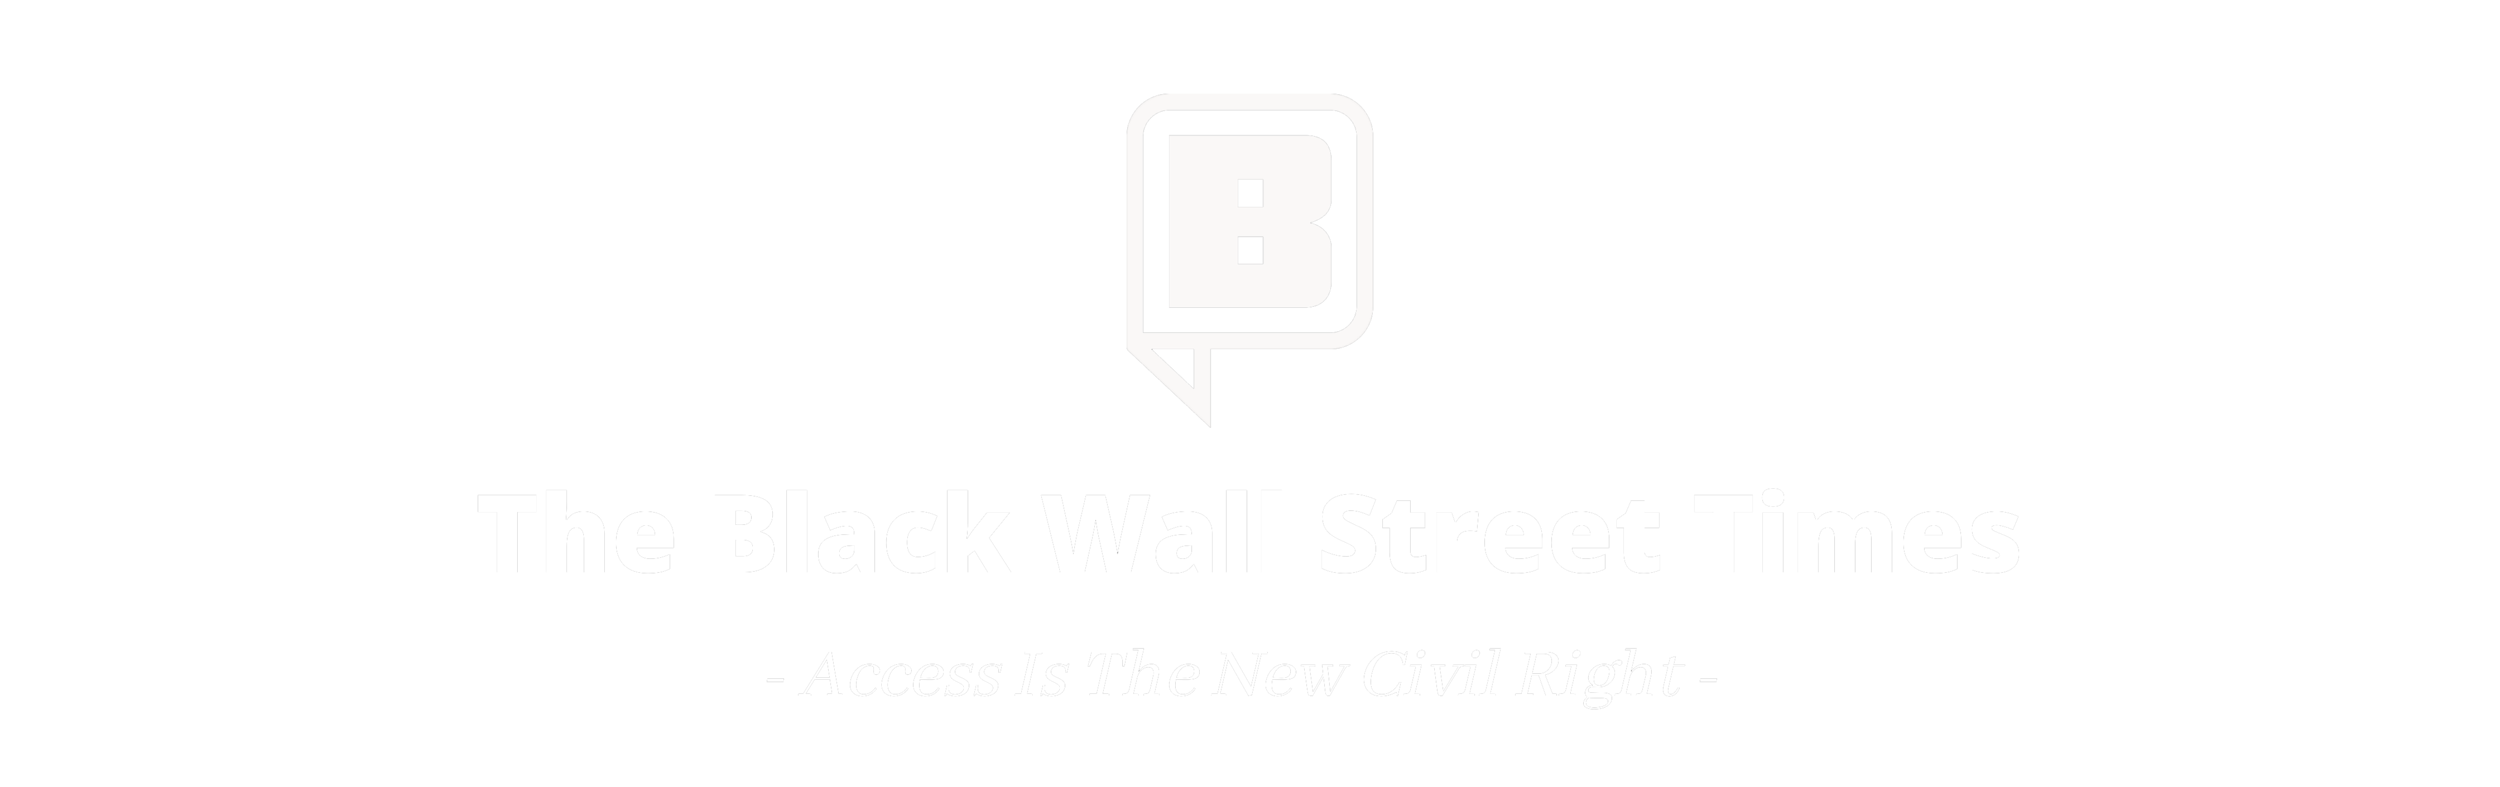 The-Black-Wall-Street-Times-3-4-e1615249929580_invert.png